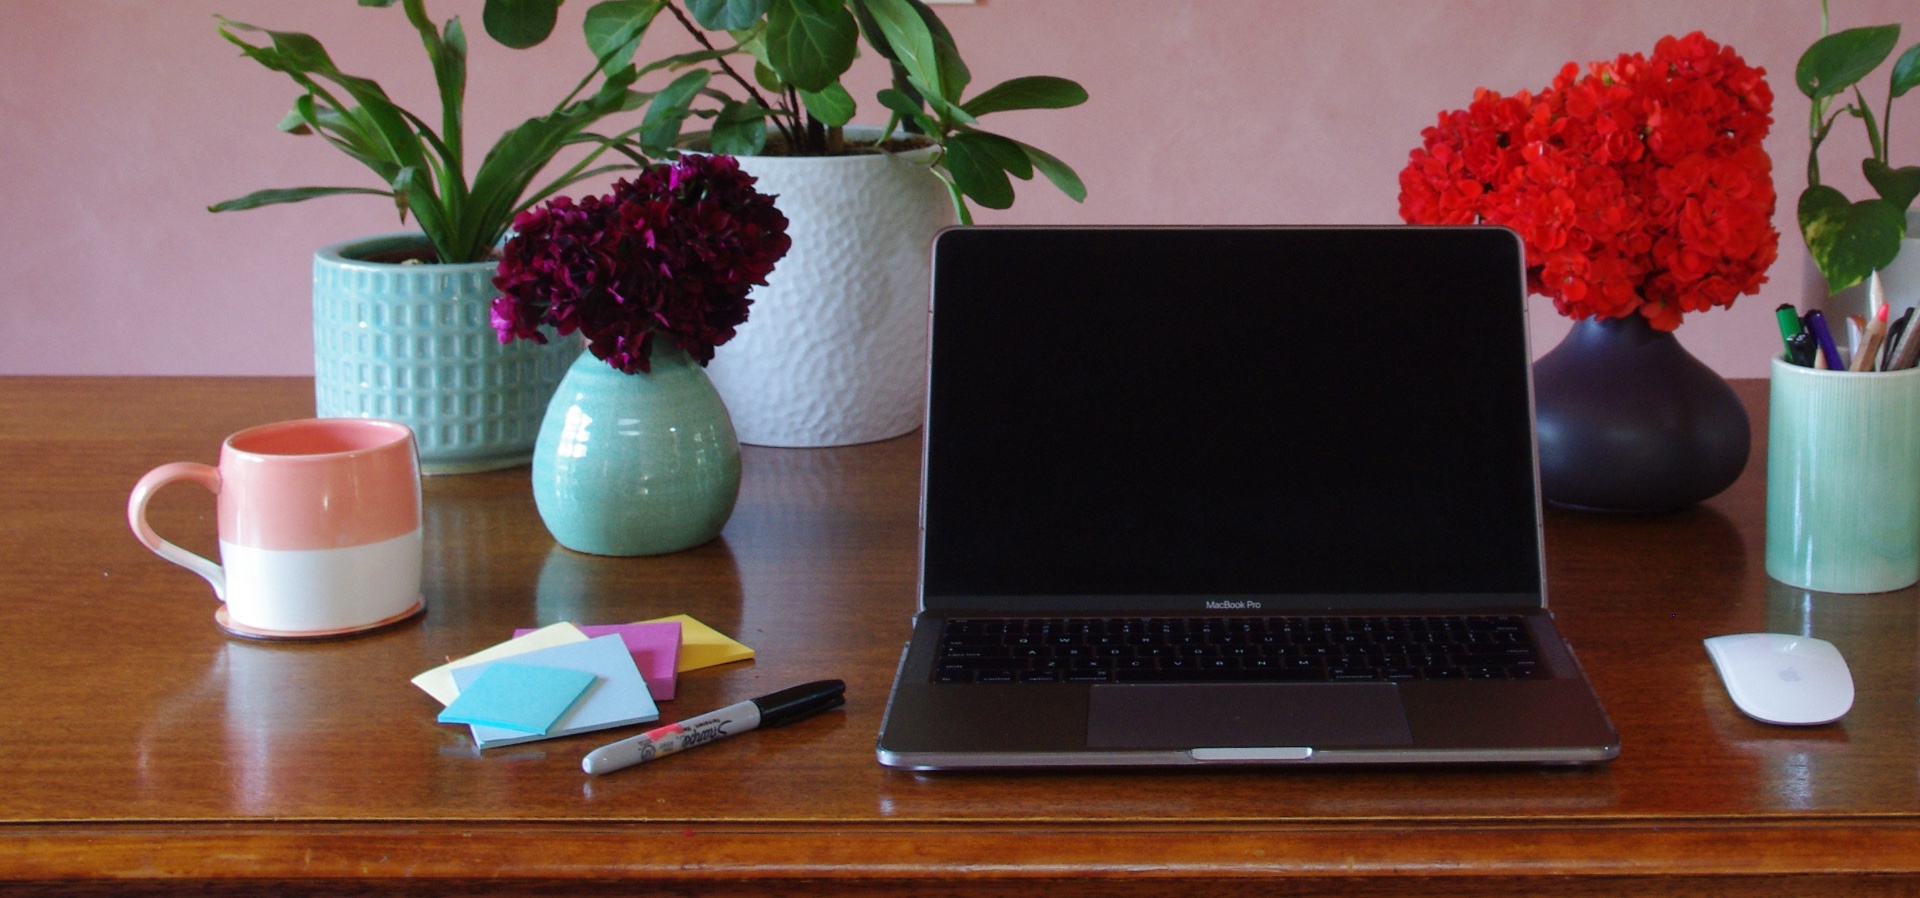 A desk with a laptop, vases of flowers, stationary and a mug